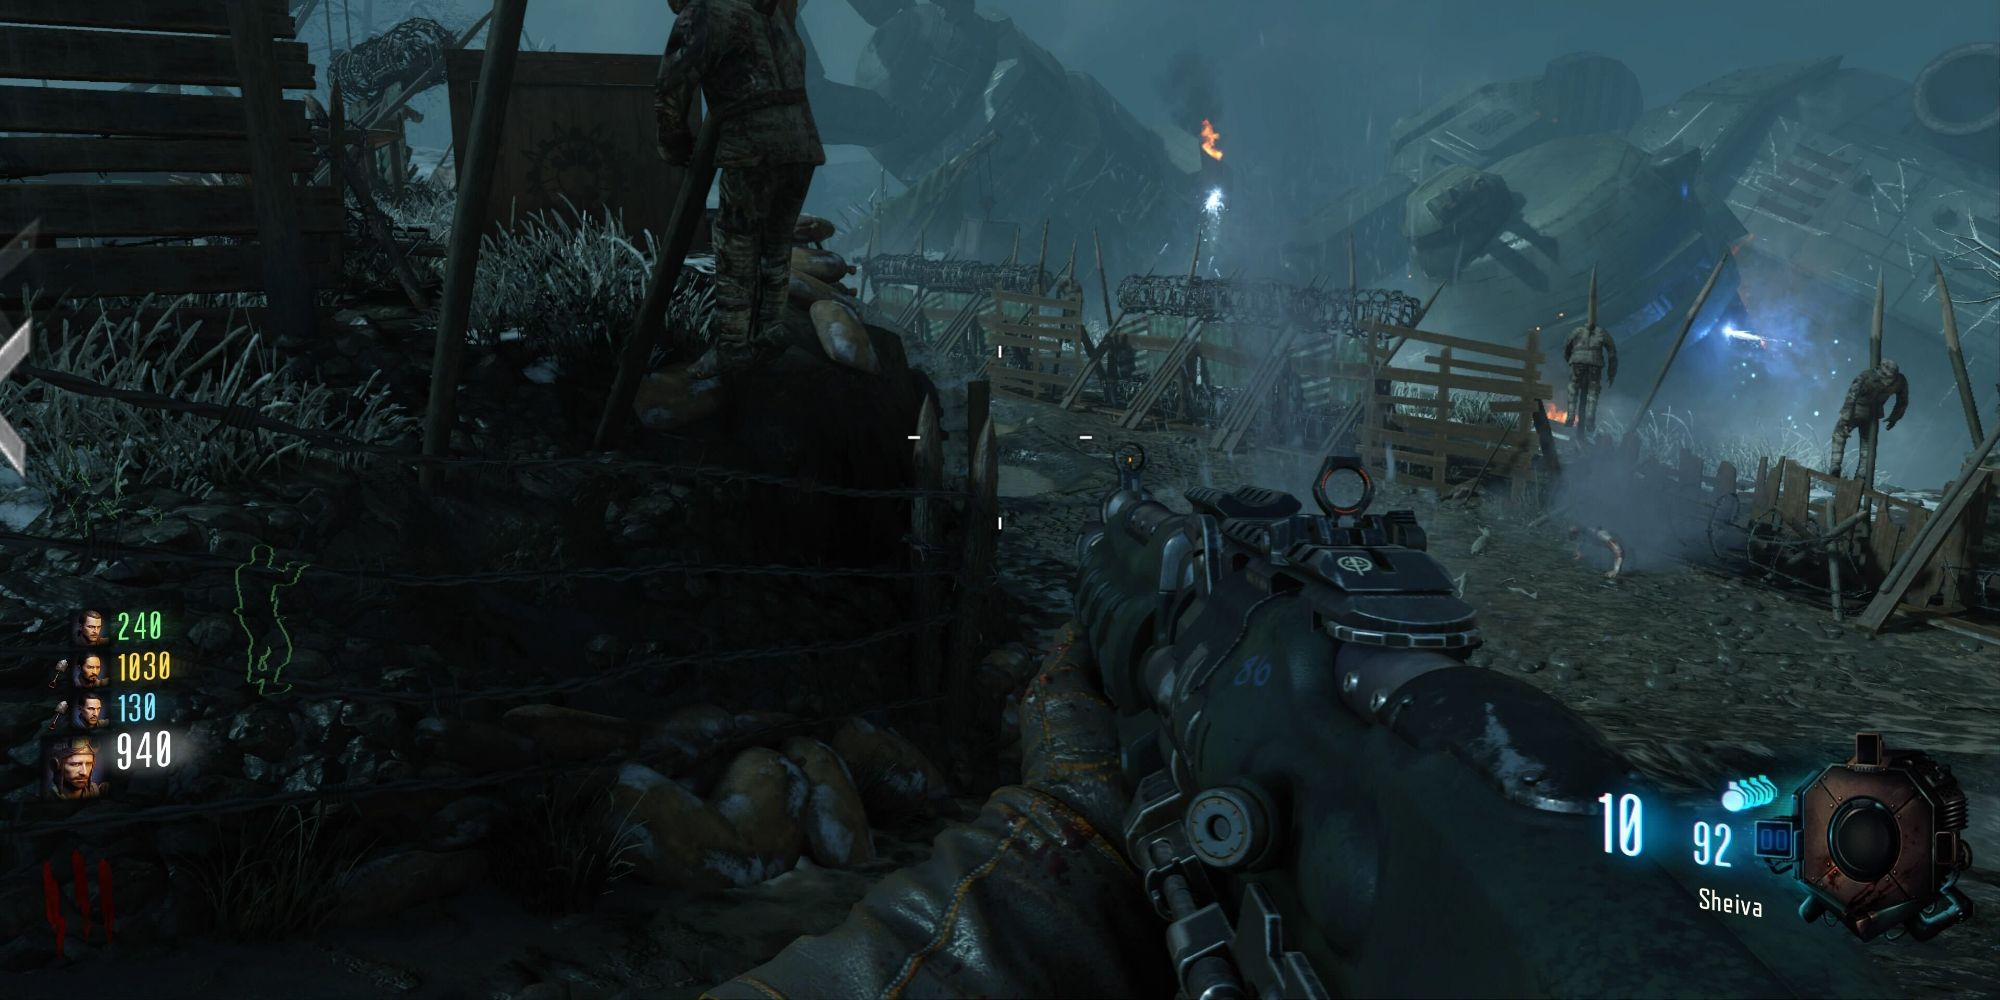 Gameplay from Call Of Duty: Black Ops 3 Zombie mode